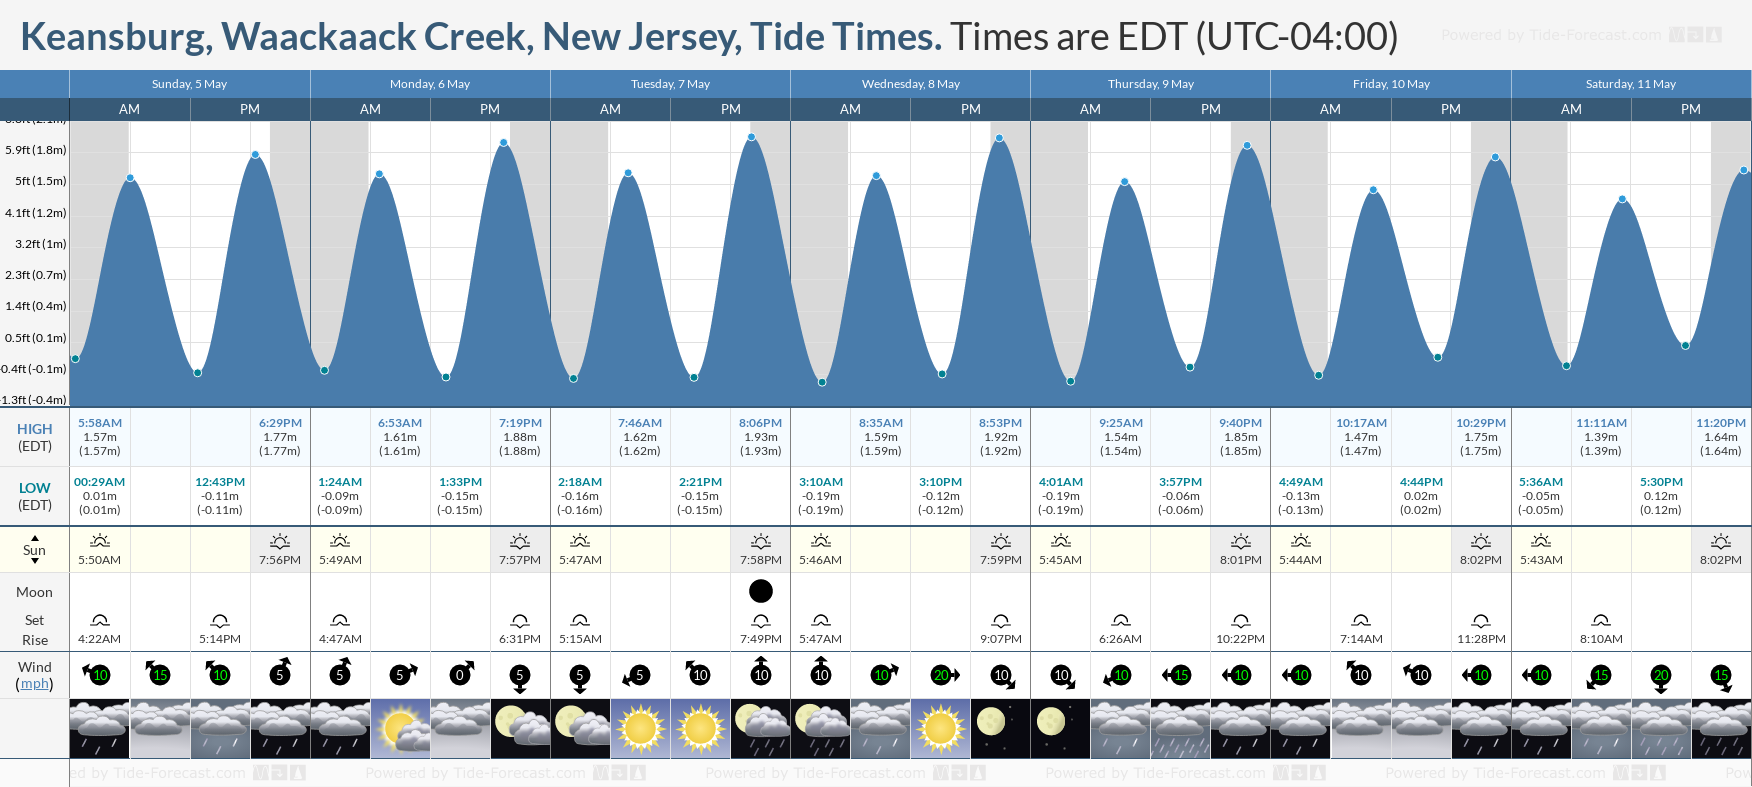 Keansburg, Waackaack Creek, New Jersey Tide Chart including high and low tide tide times for the next 7 days